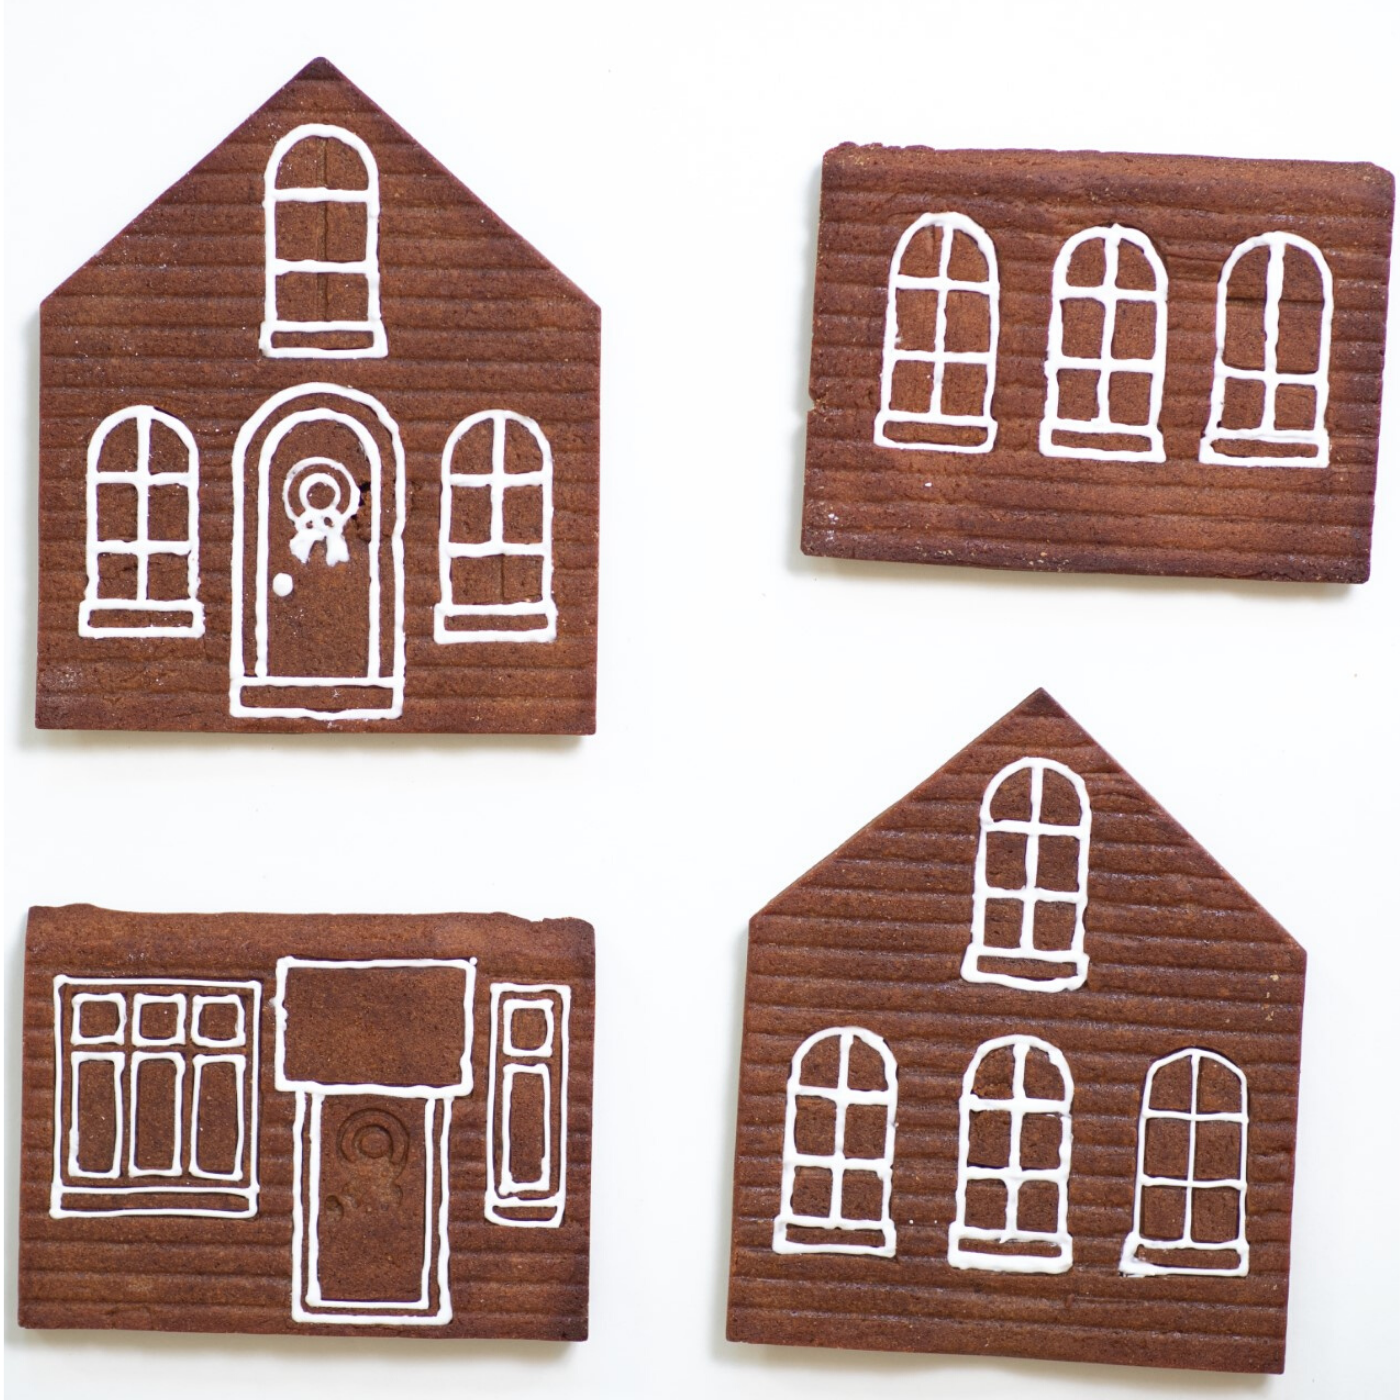 image of the 4 sides of the gingerbread house with windows and doors outlined in white icing